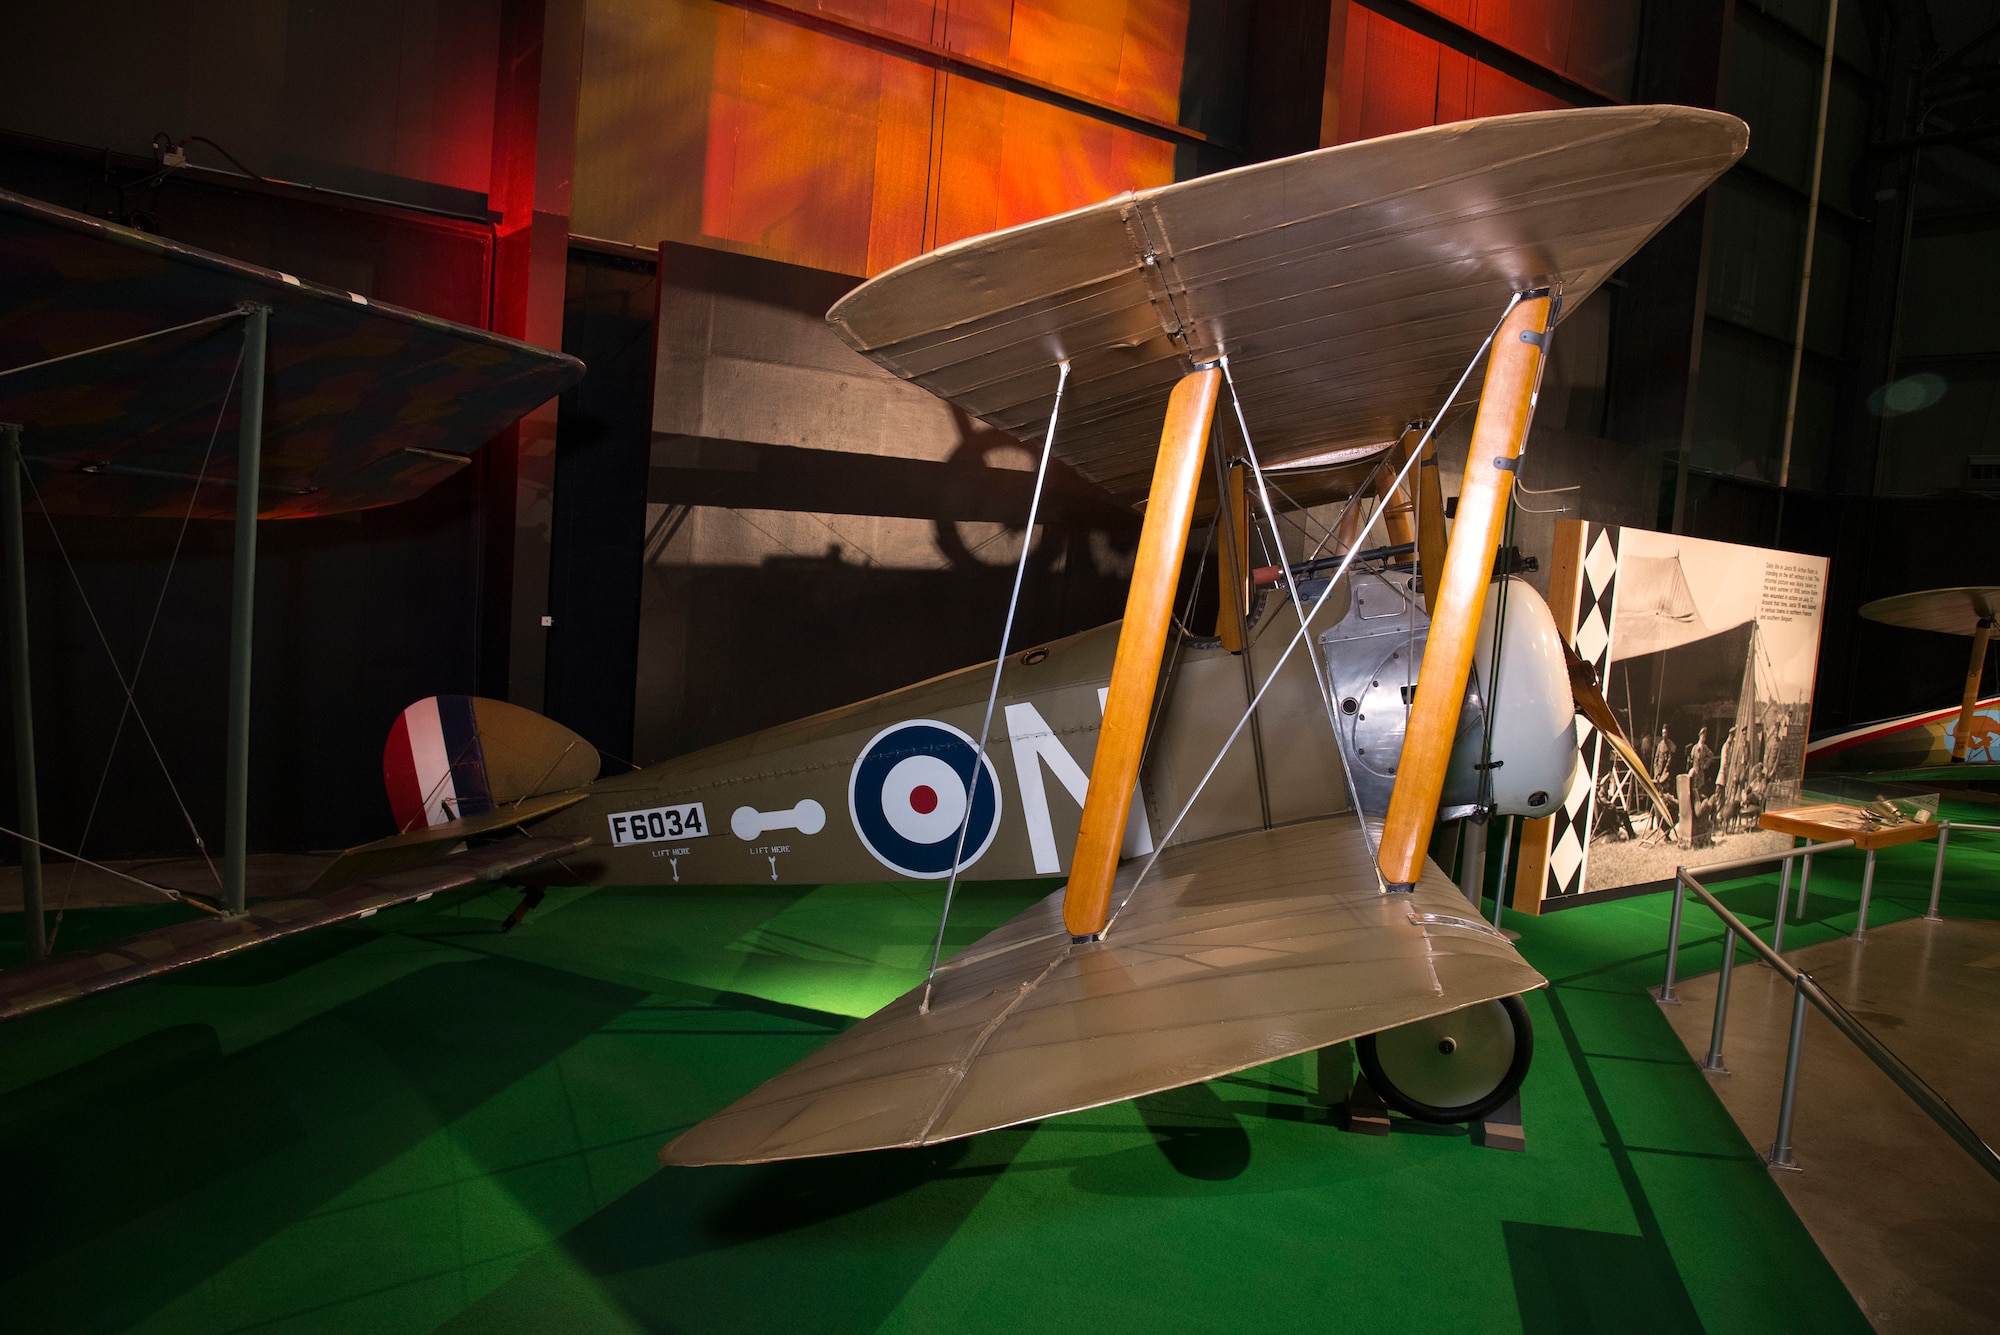 DAYTON, Ohio -- Sopwith Camel F.1 in the Early Years Gallery at the National Museum of the United States Air Force. (U.S. Air Force photo by Ken LaRock)